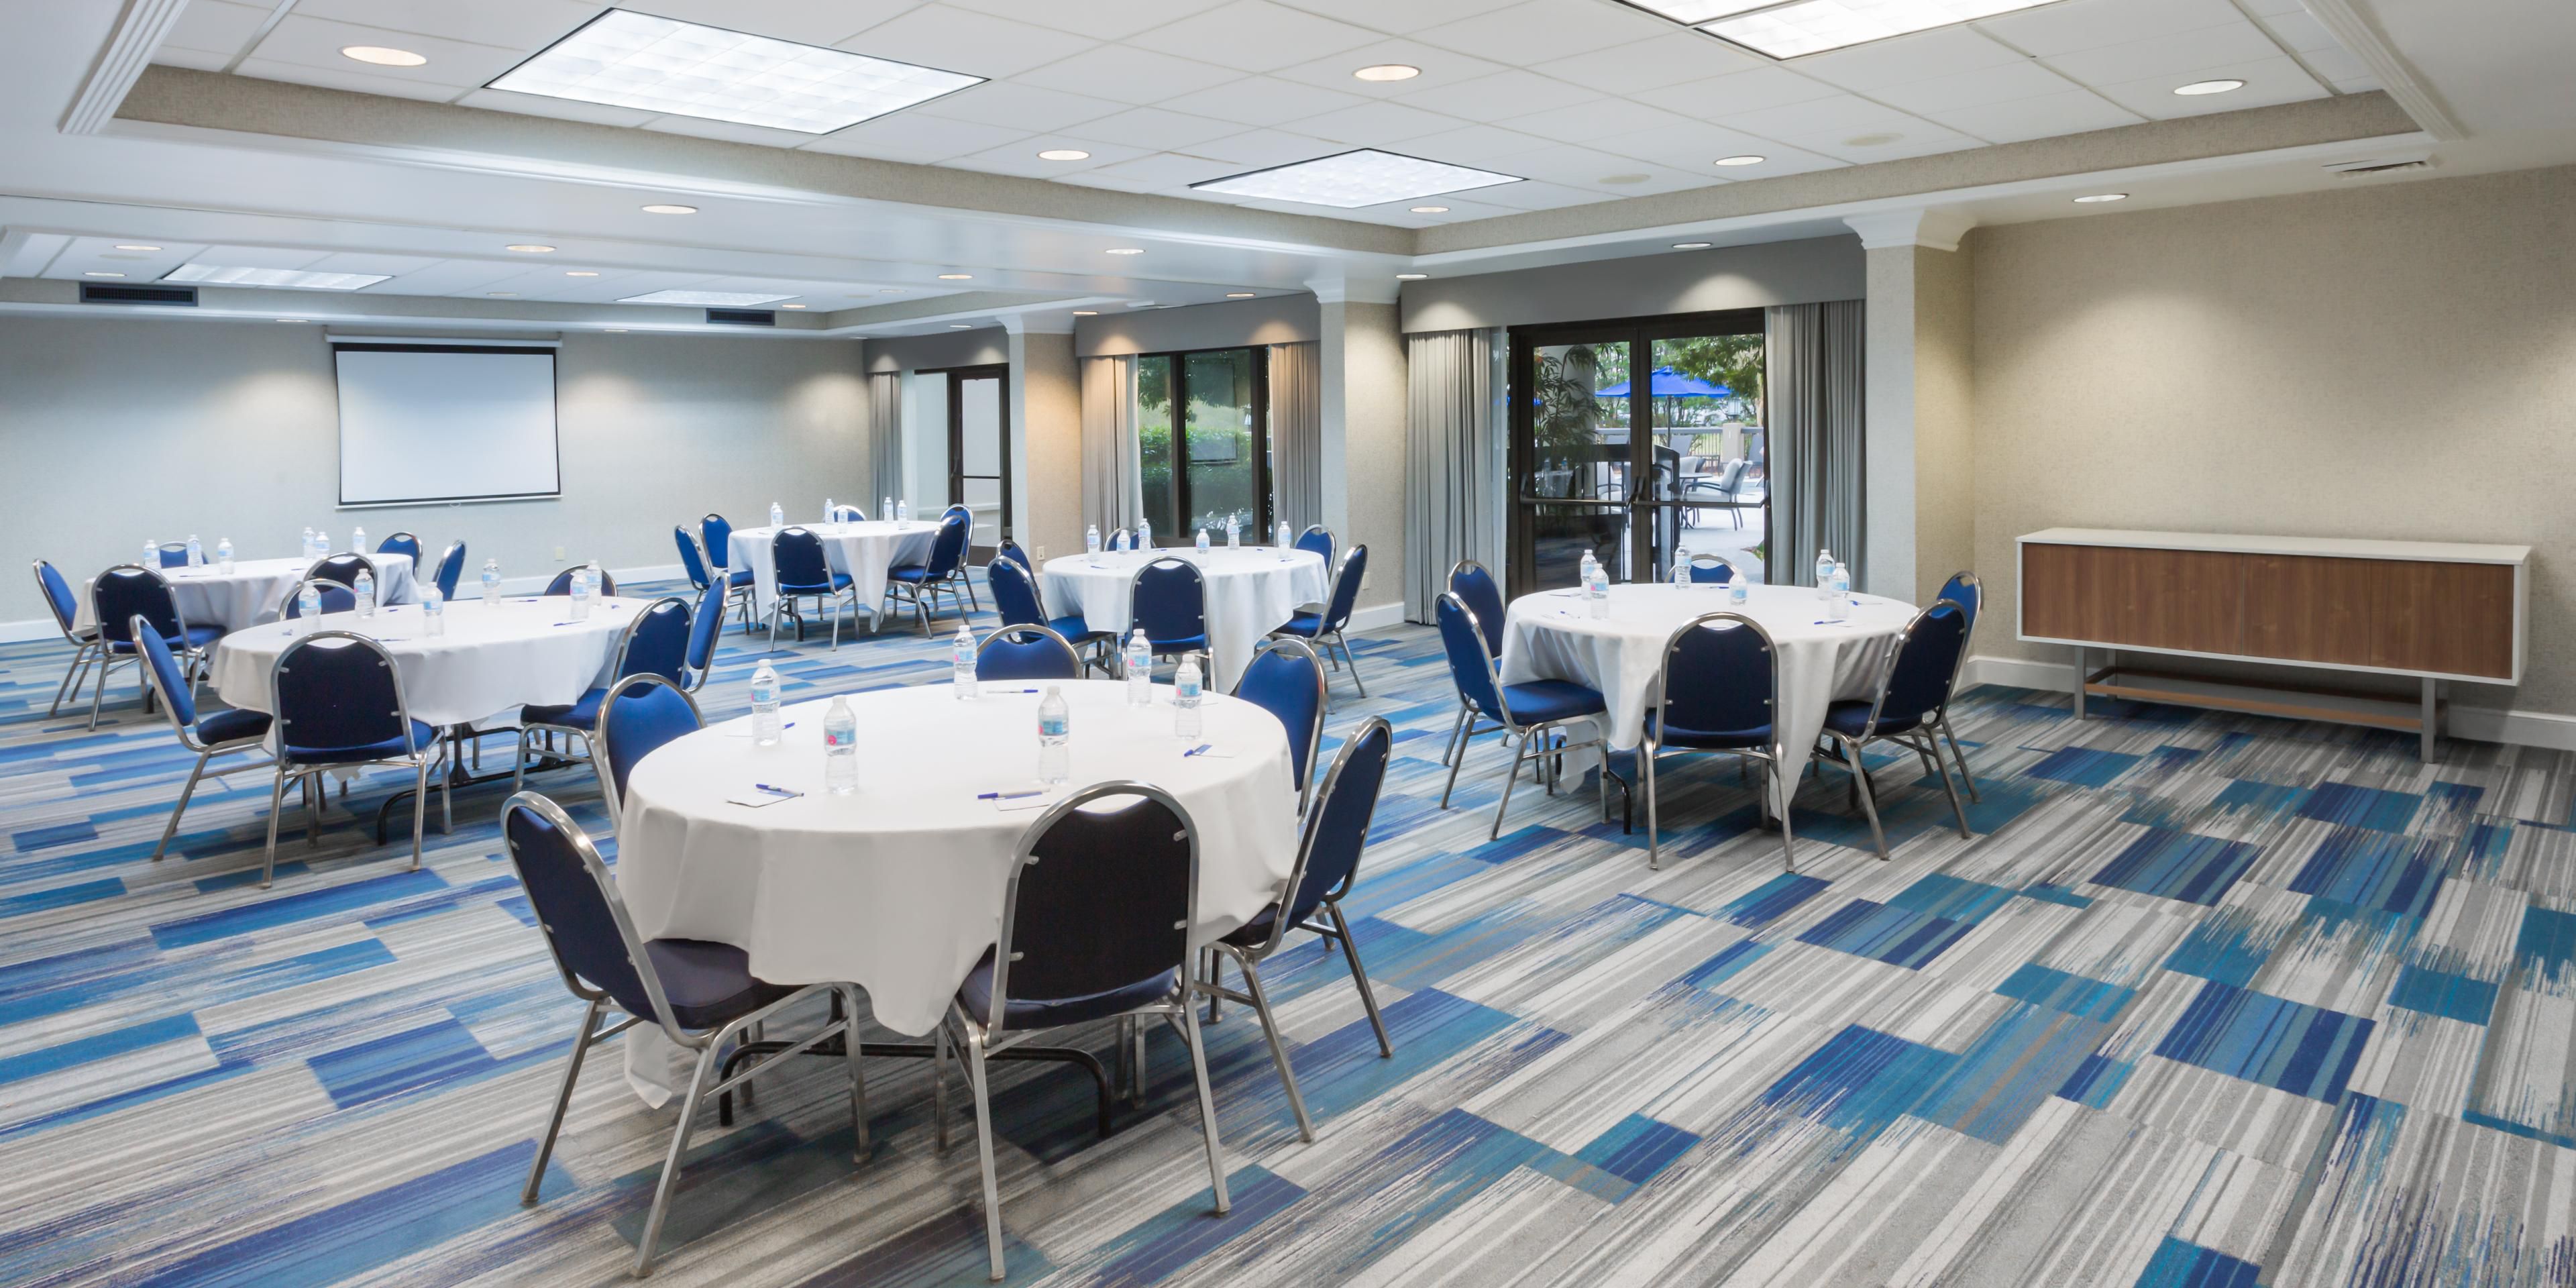 Our newly remodeled meeting & events rooms can accommodate up to 100 people in a variety of settings. Choose from several local caterers or feel free to bring in your own. A/V equipment is available for rent & room rental fee is based on season and time of day.